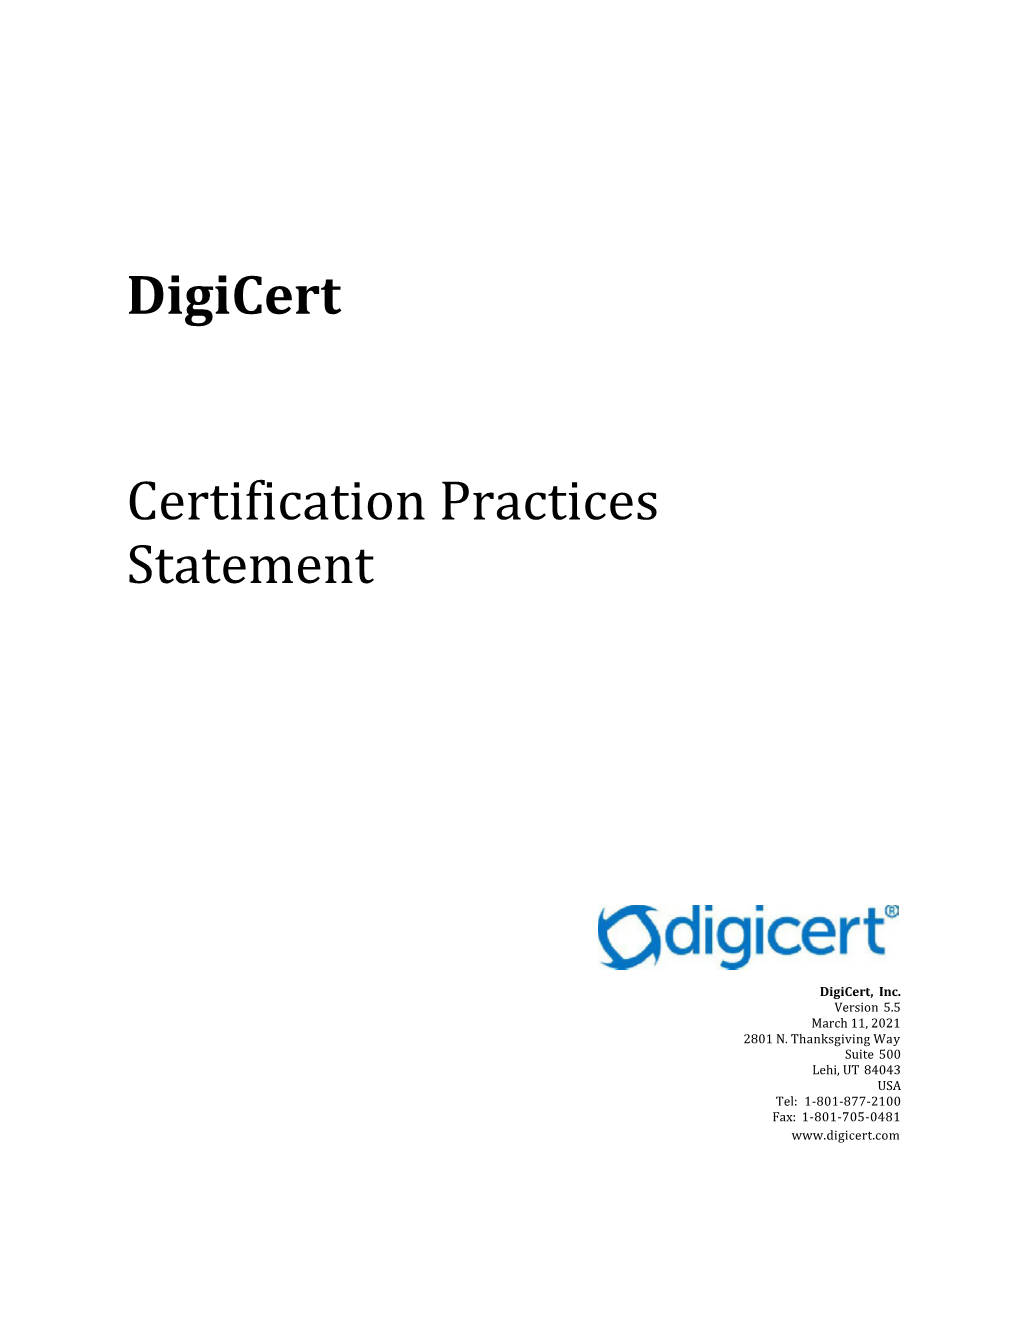 Digicert Certification Practices Statement and Was First Approved for Publication on 9 August 2010 by the Digicert Policy Authority (DCPA)